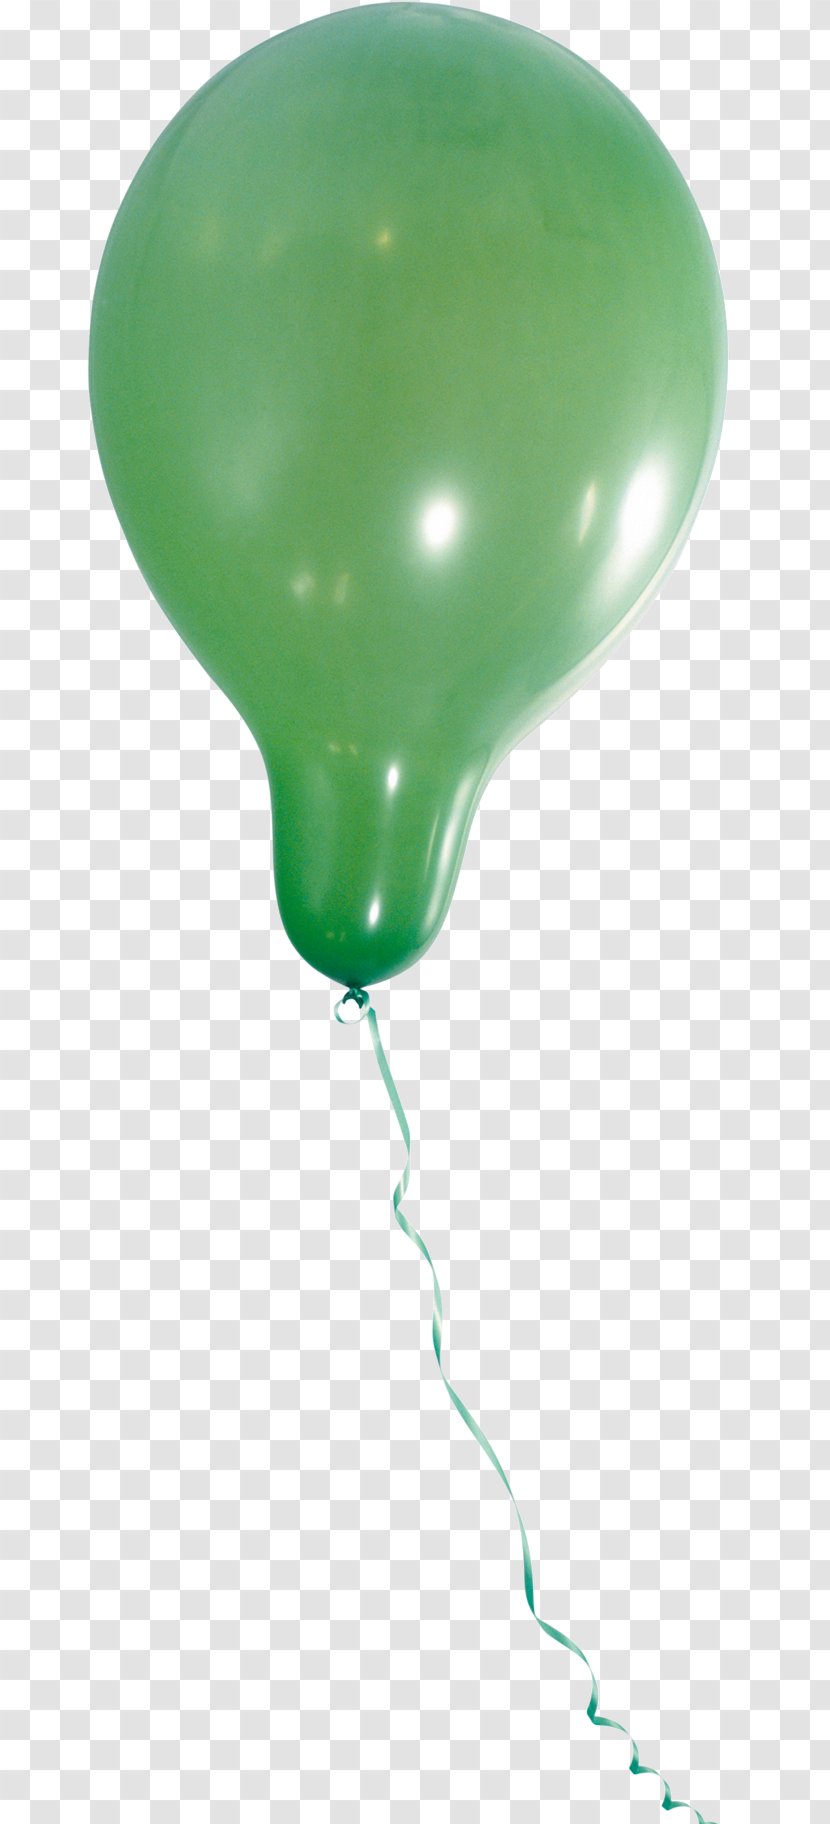 Toy Balloon Green Party - Supply - Balloons Transparent PNG